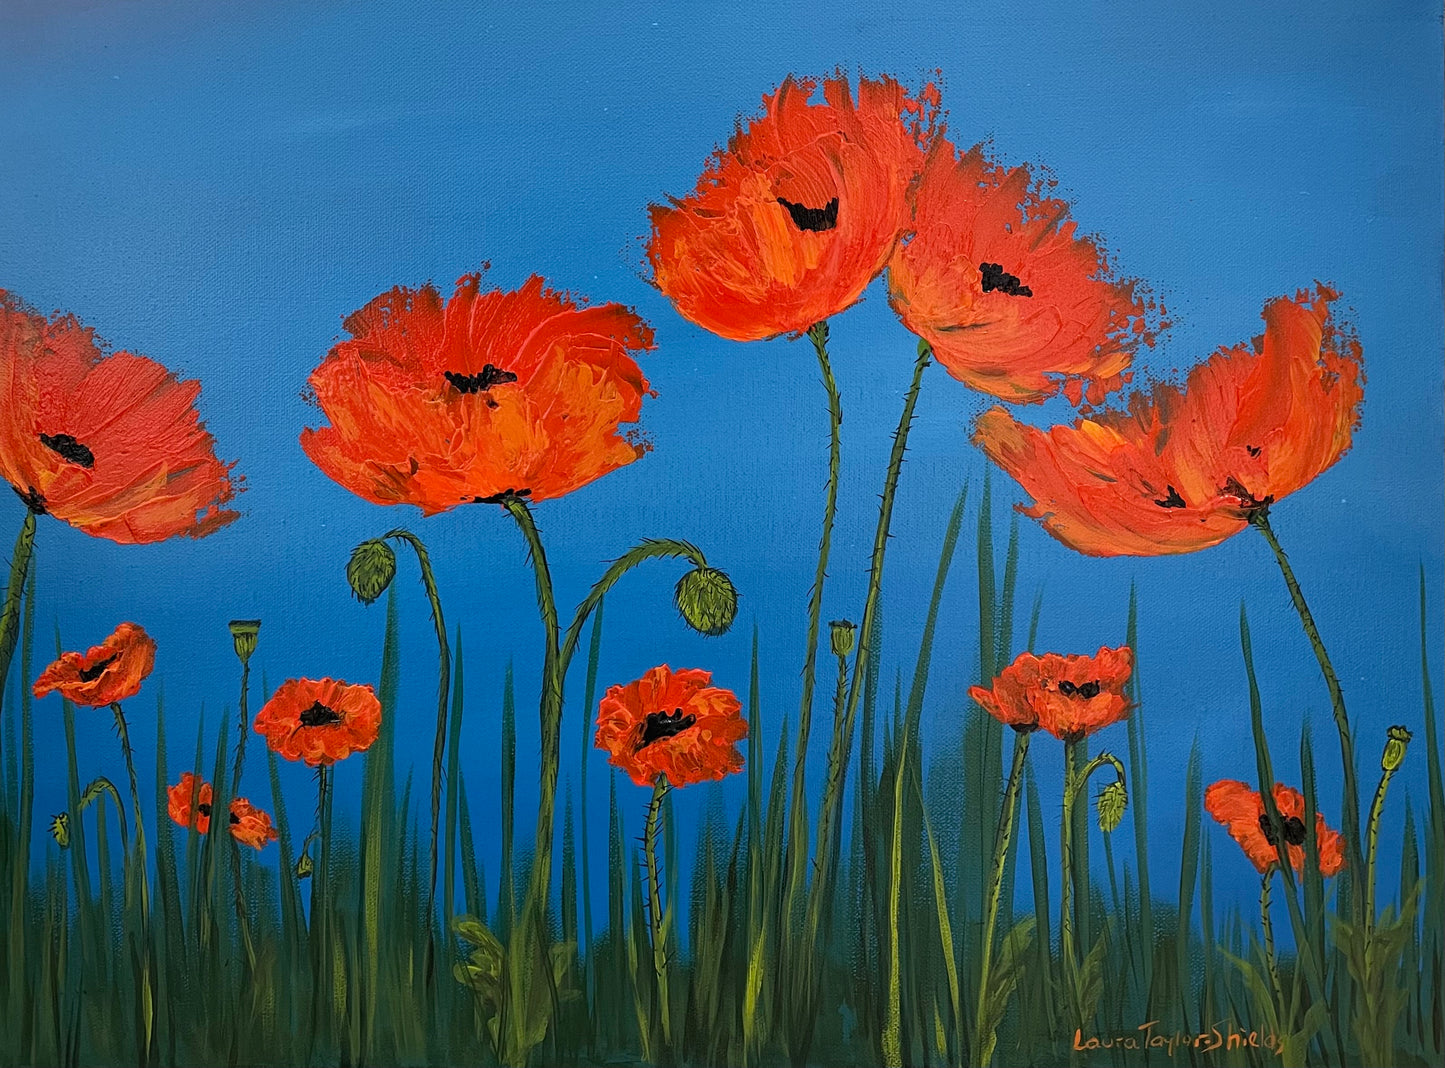 Poppies by Laura Taylor-Shields